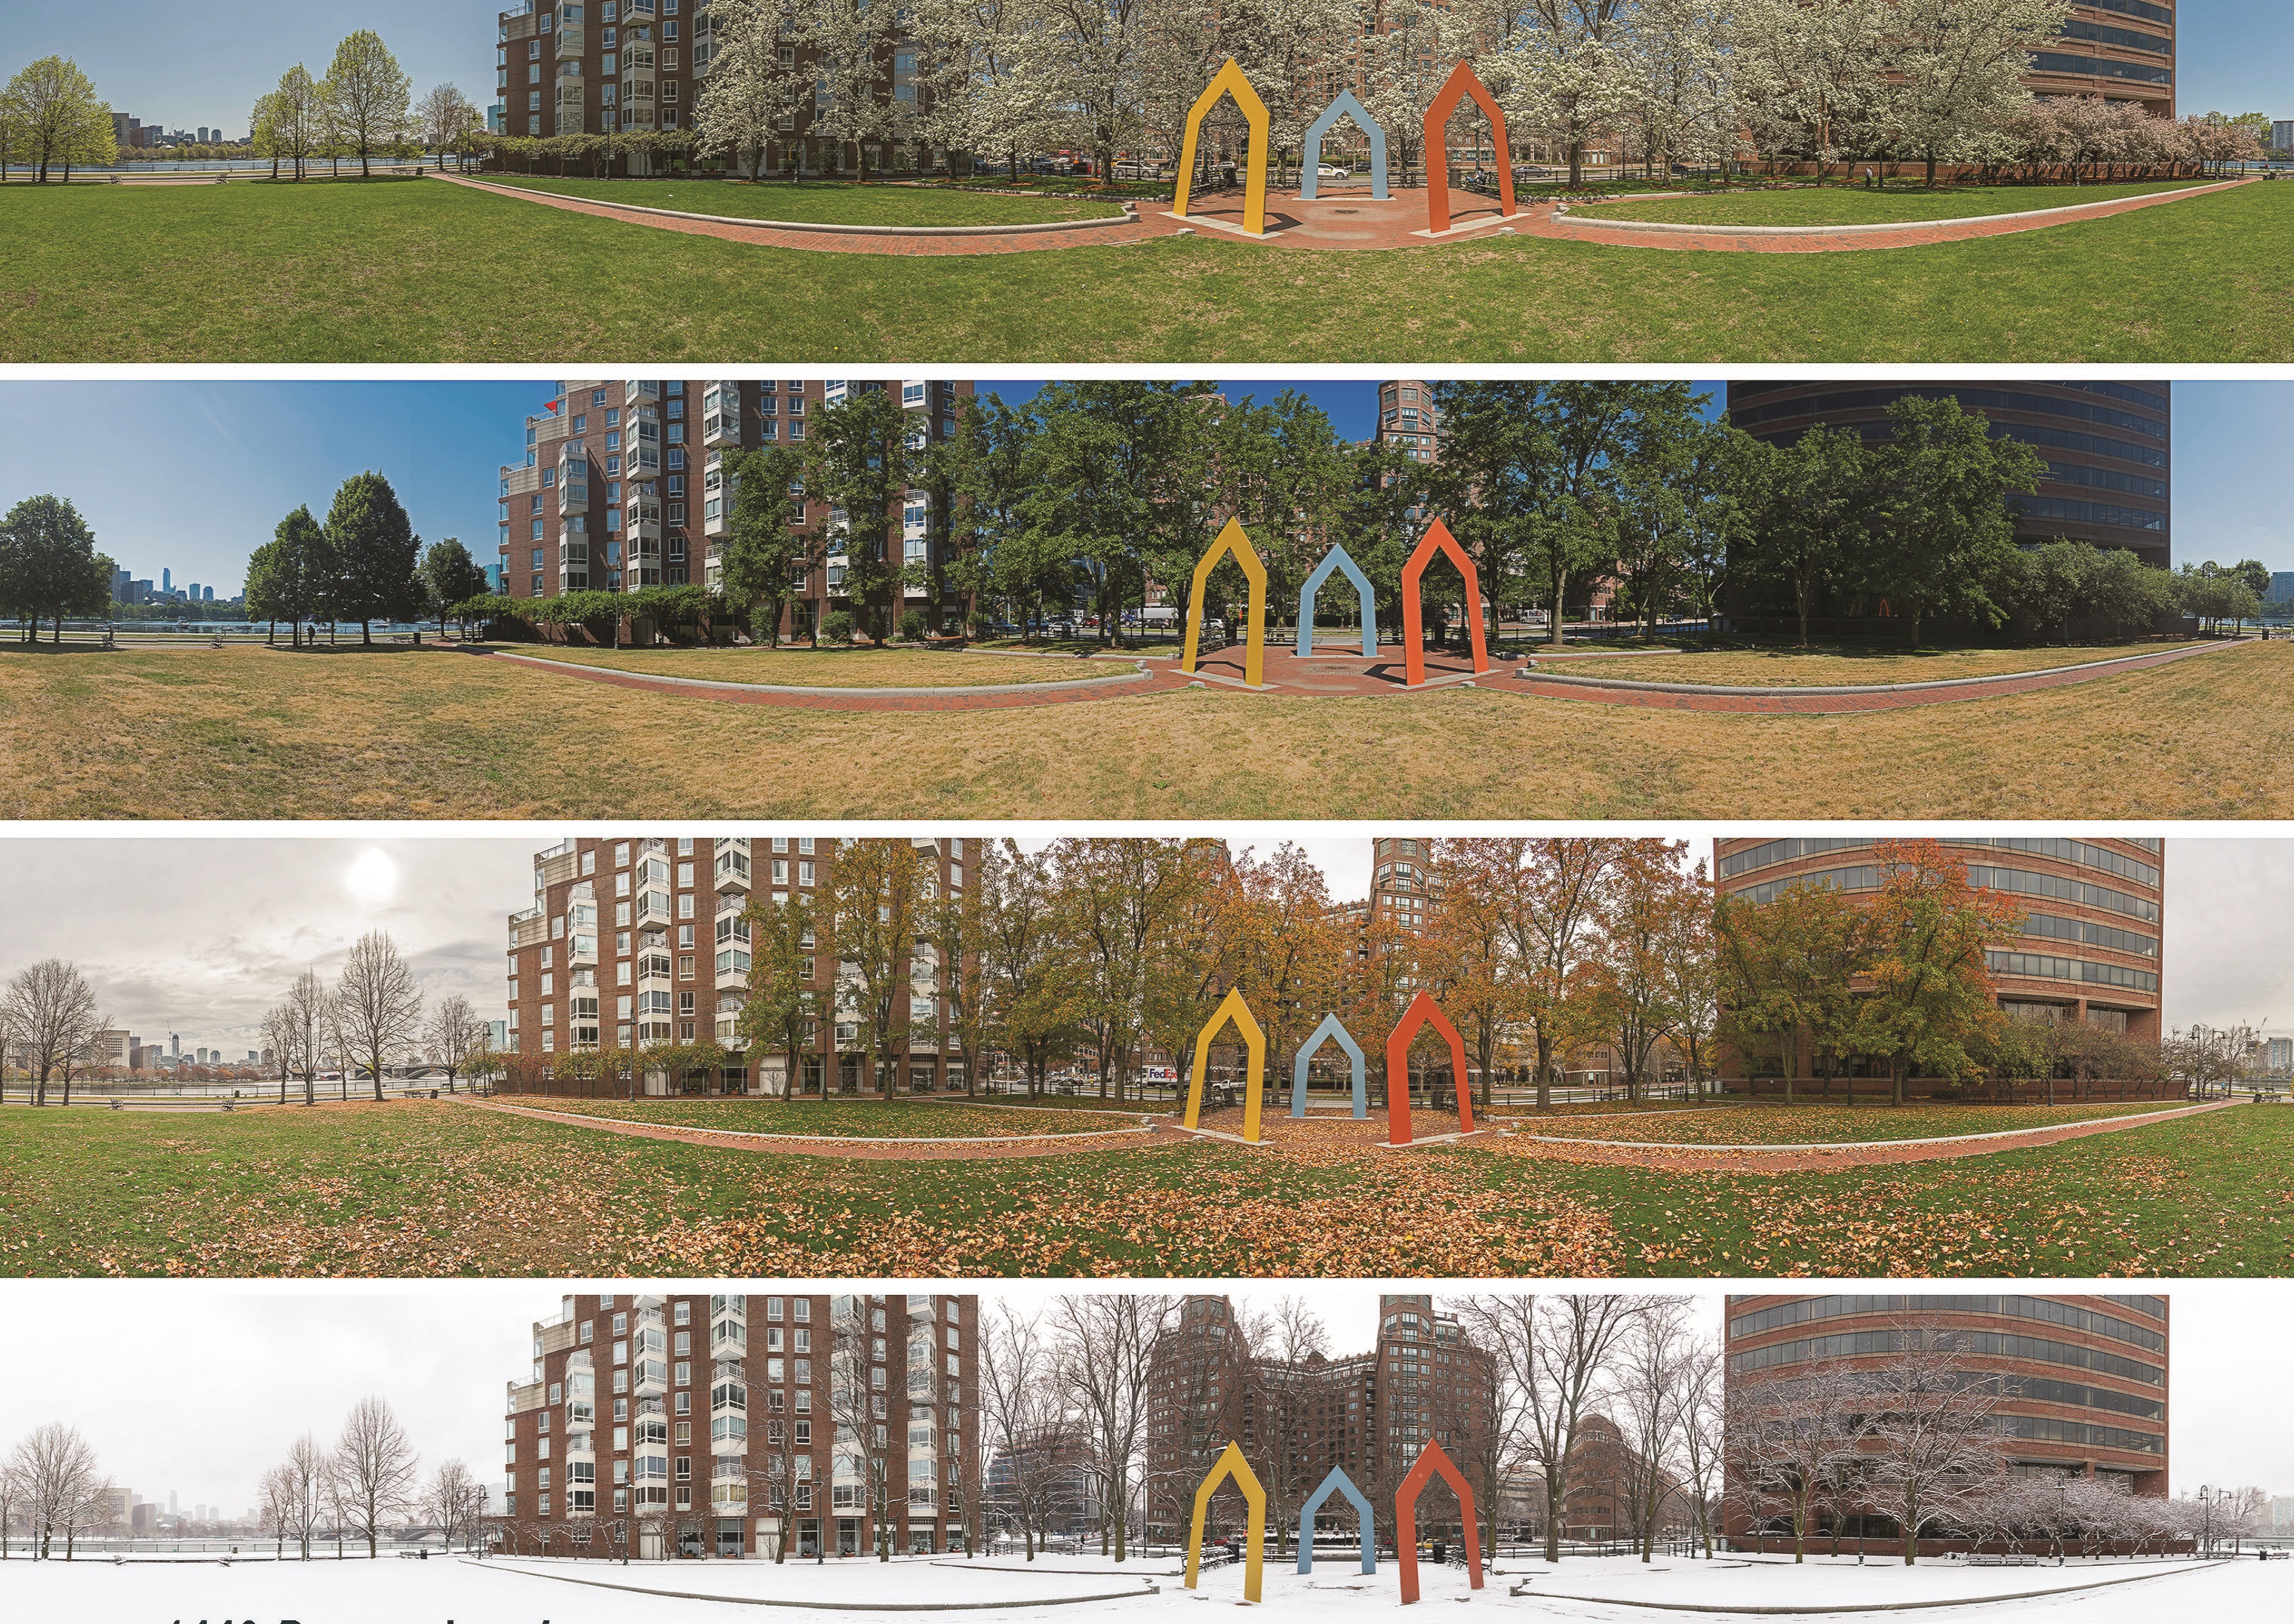 Examples of Richard Hackel's Panoramic Photography in different seasons